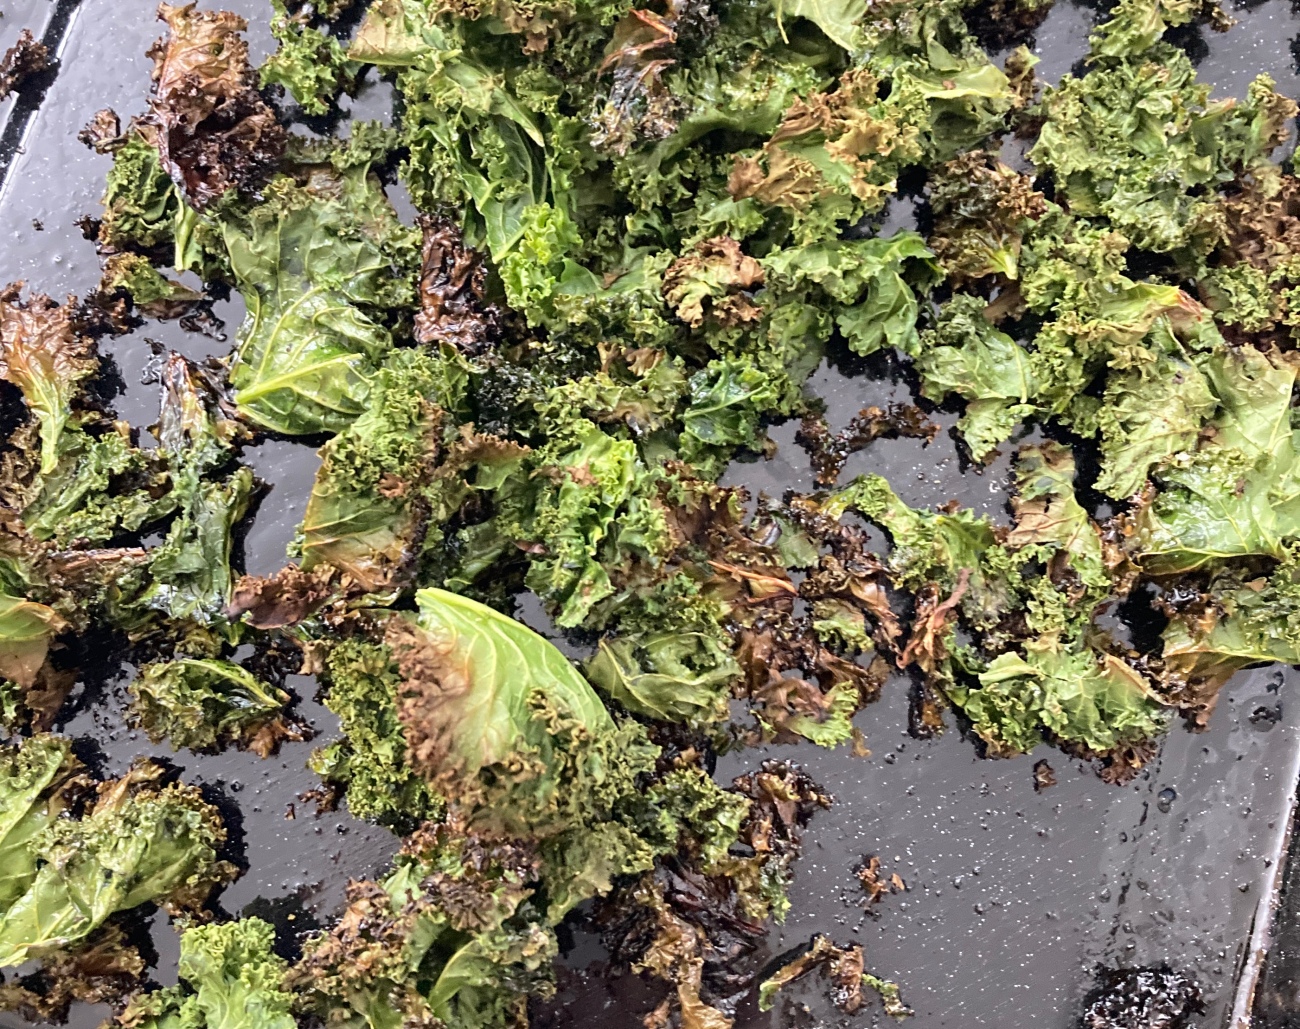 Preheat oven to 425˚F. Add kale to baking sheet and coat with oil. Add salt and pepper to taste. Bake for 12-15 minutes or until edges of kale begin to crisp up.